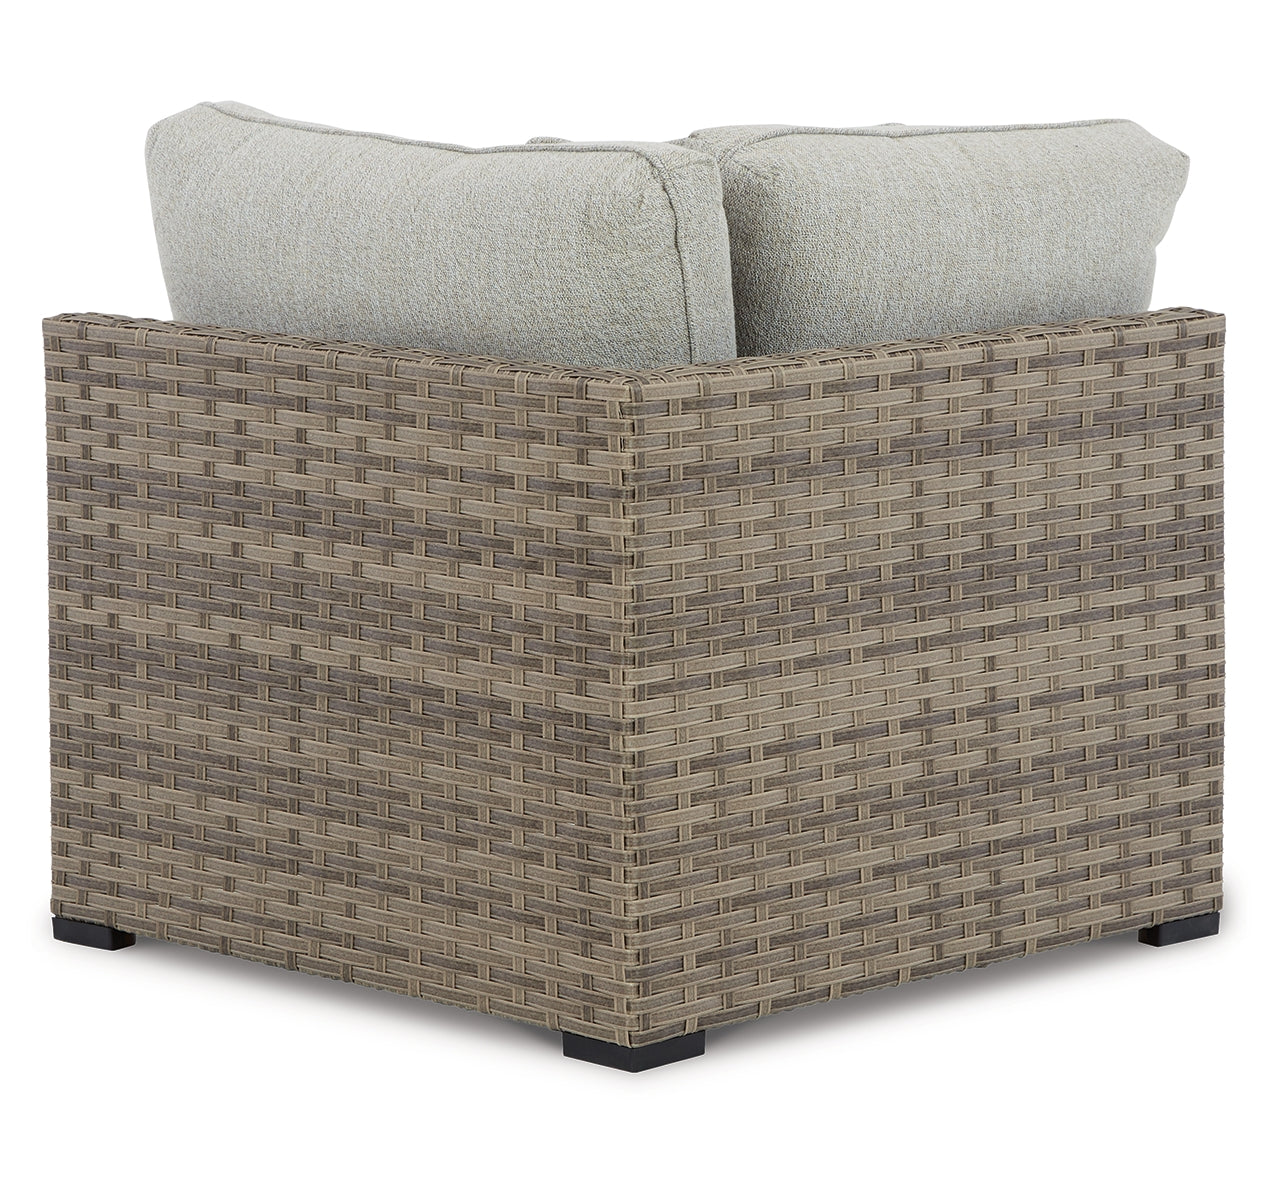 Calworth Outdoor Corner with Cushion (Set of 2)